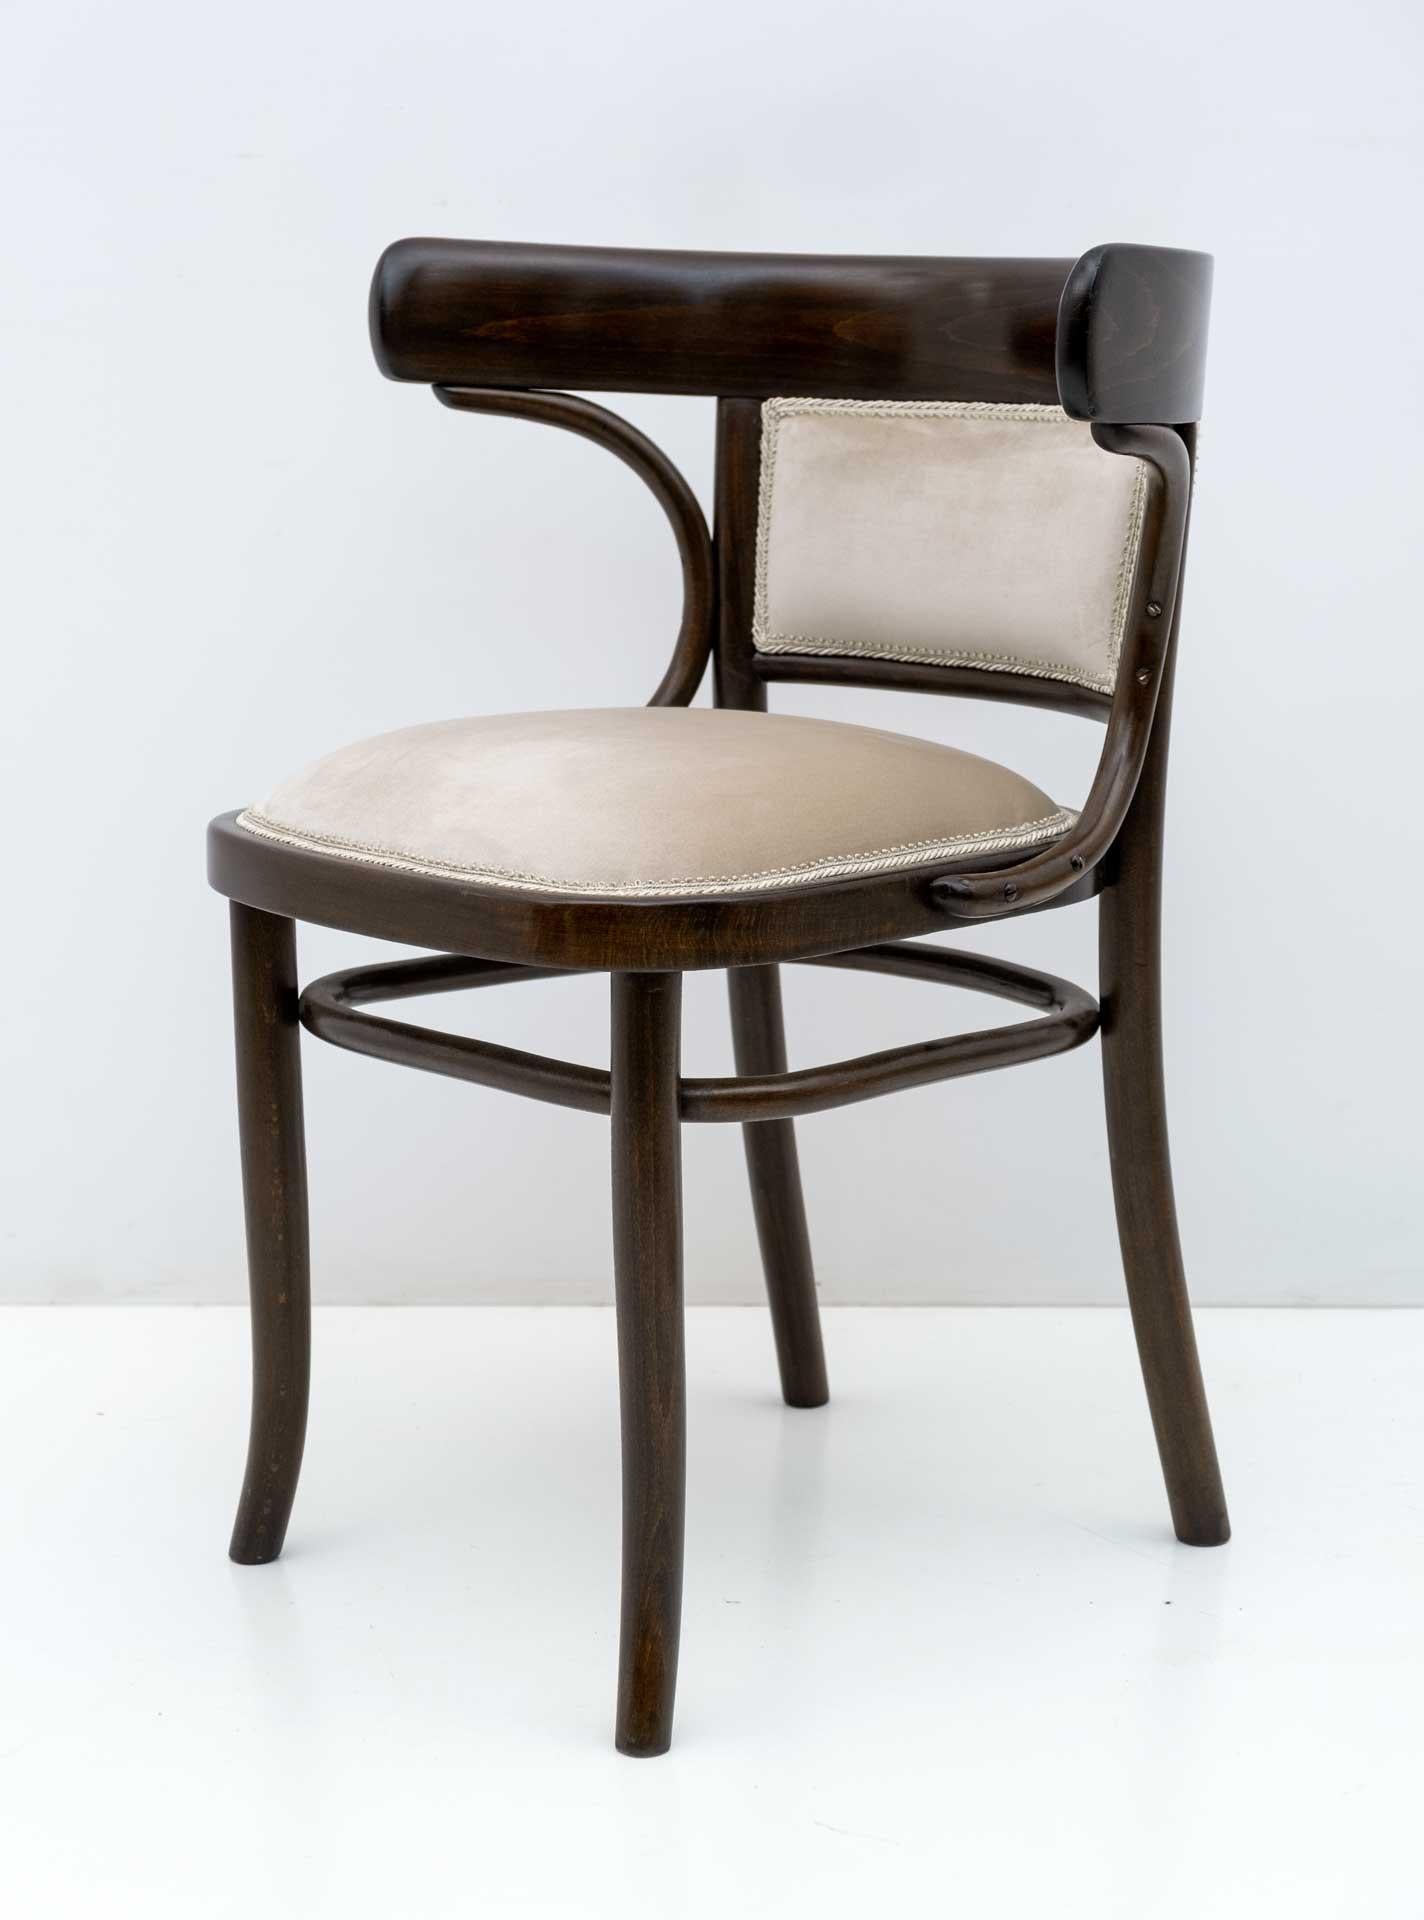 Thonet Austrian arm chair, c. 1900/1920, In curved beech wood, the upholstery has been redone in ivory velvet and the wooden parts have been polished with shellac, respecting their originality.